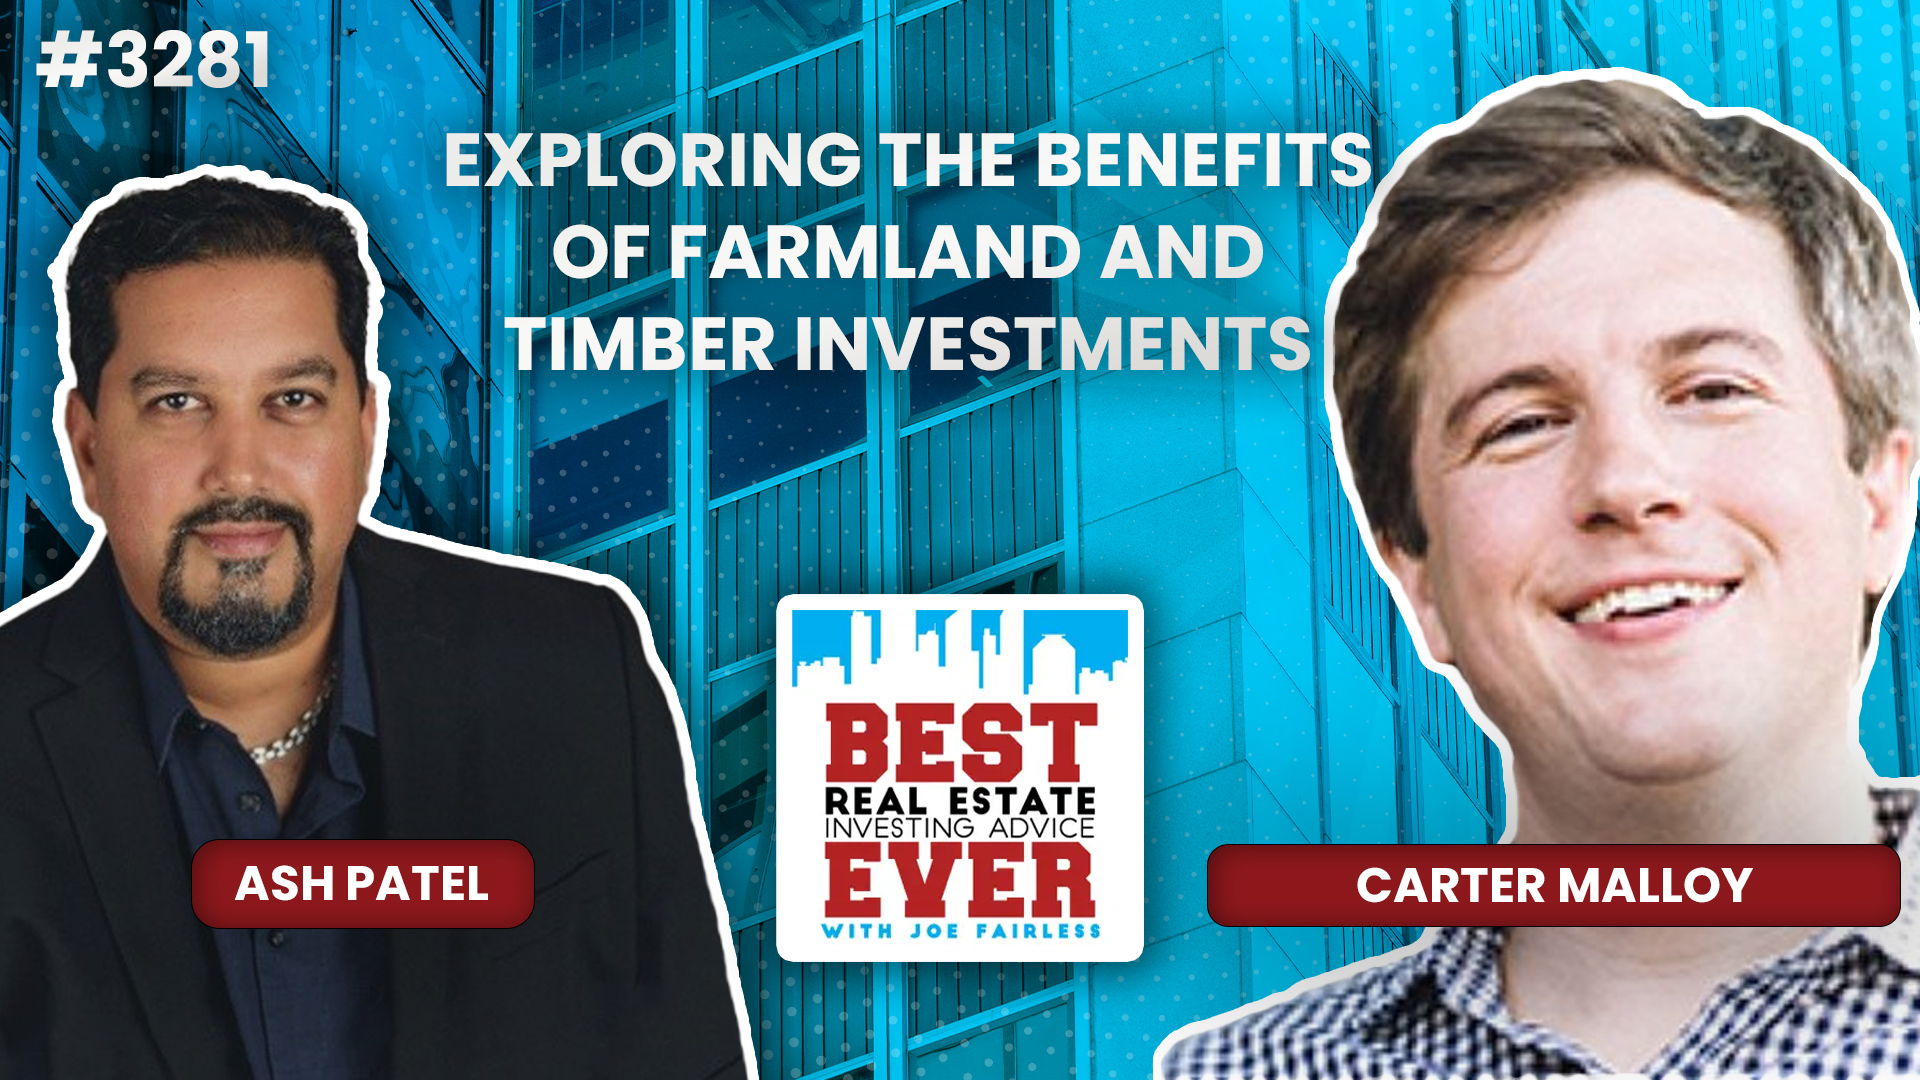 JF3281: Carter Malloy — Exploring the Benefits of Farmland and Timber Investments